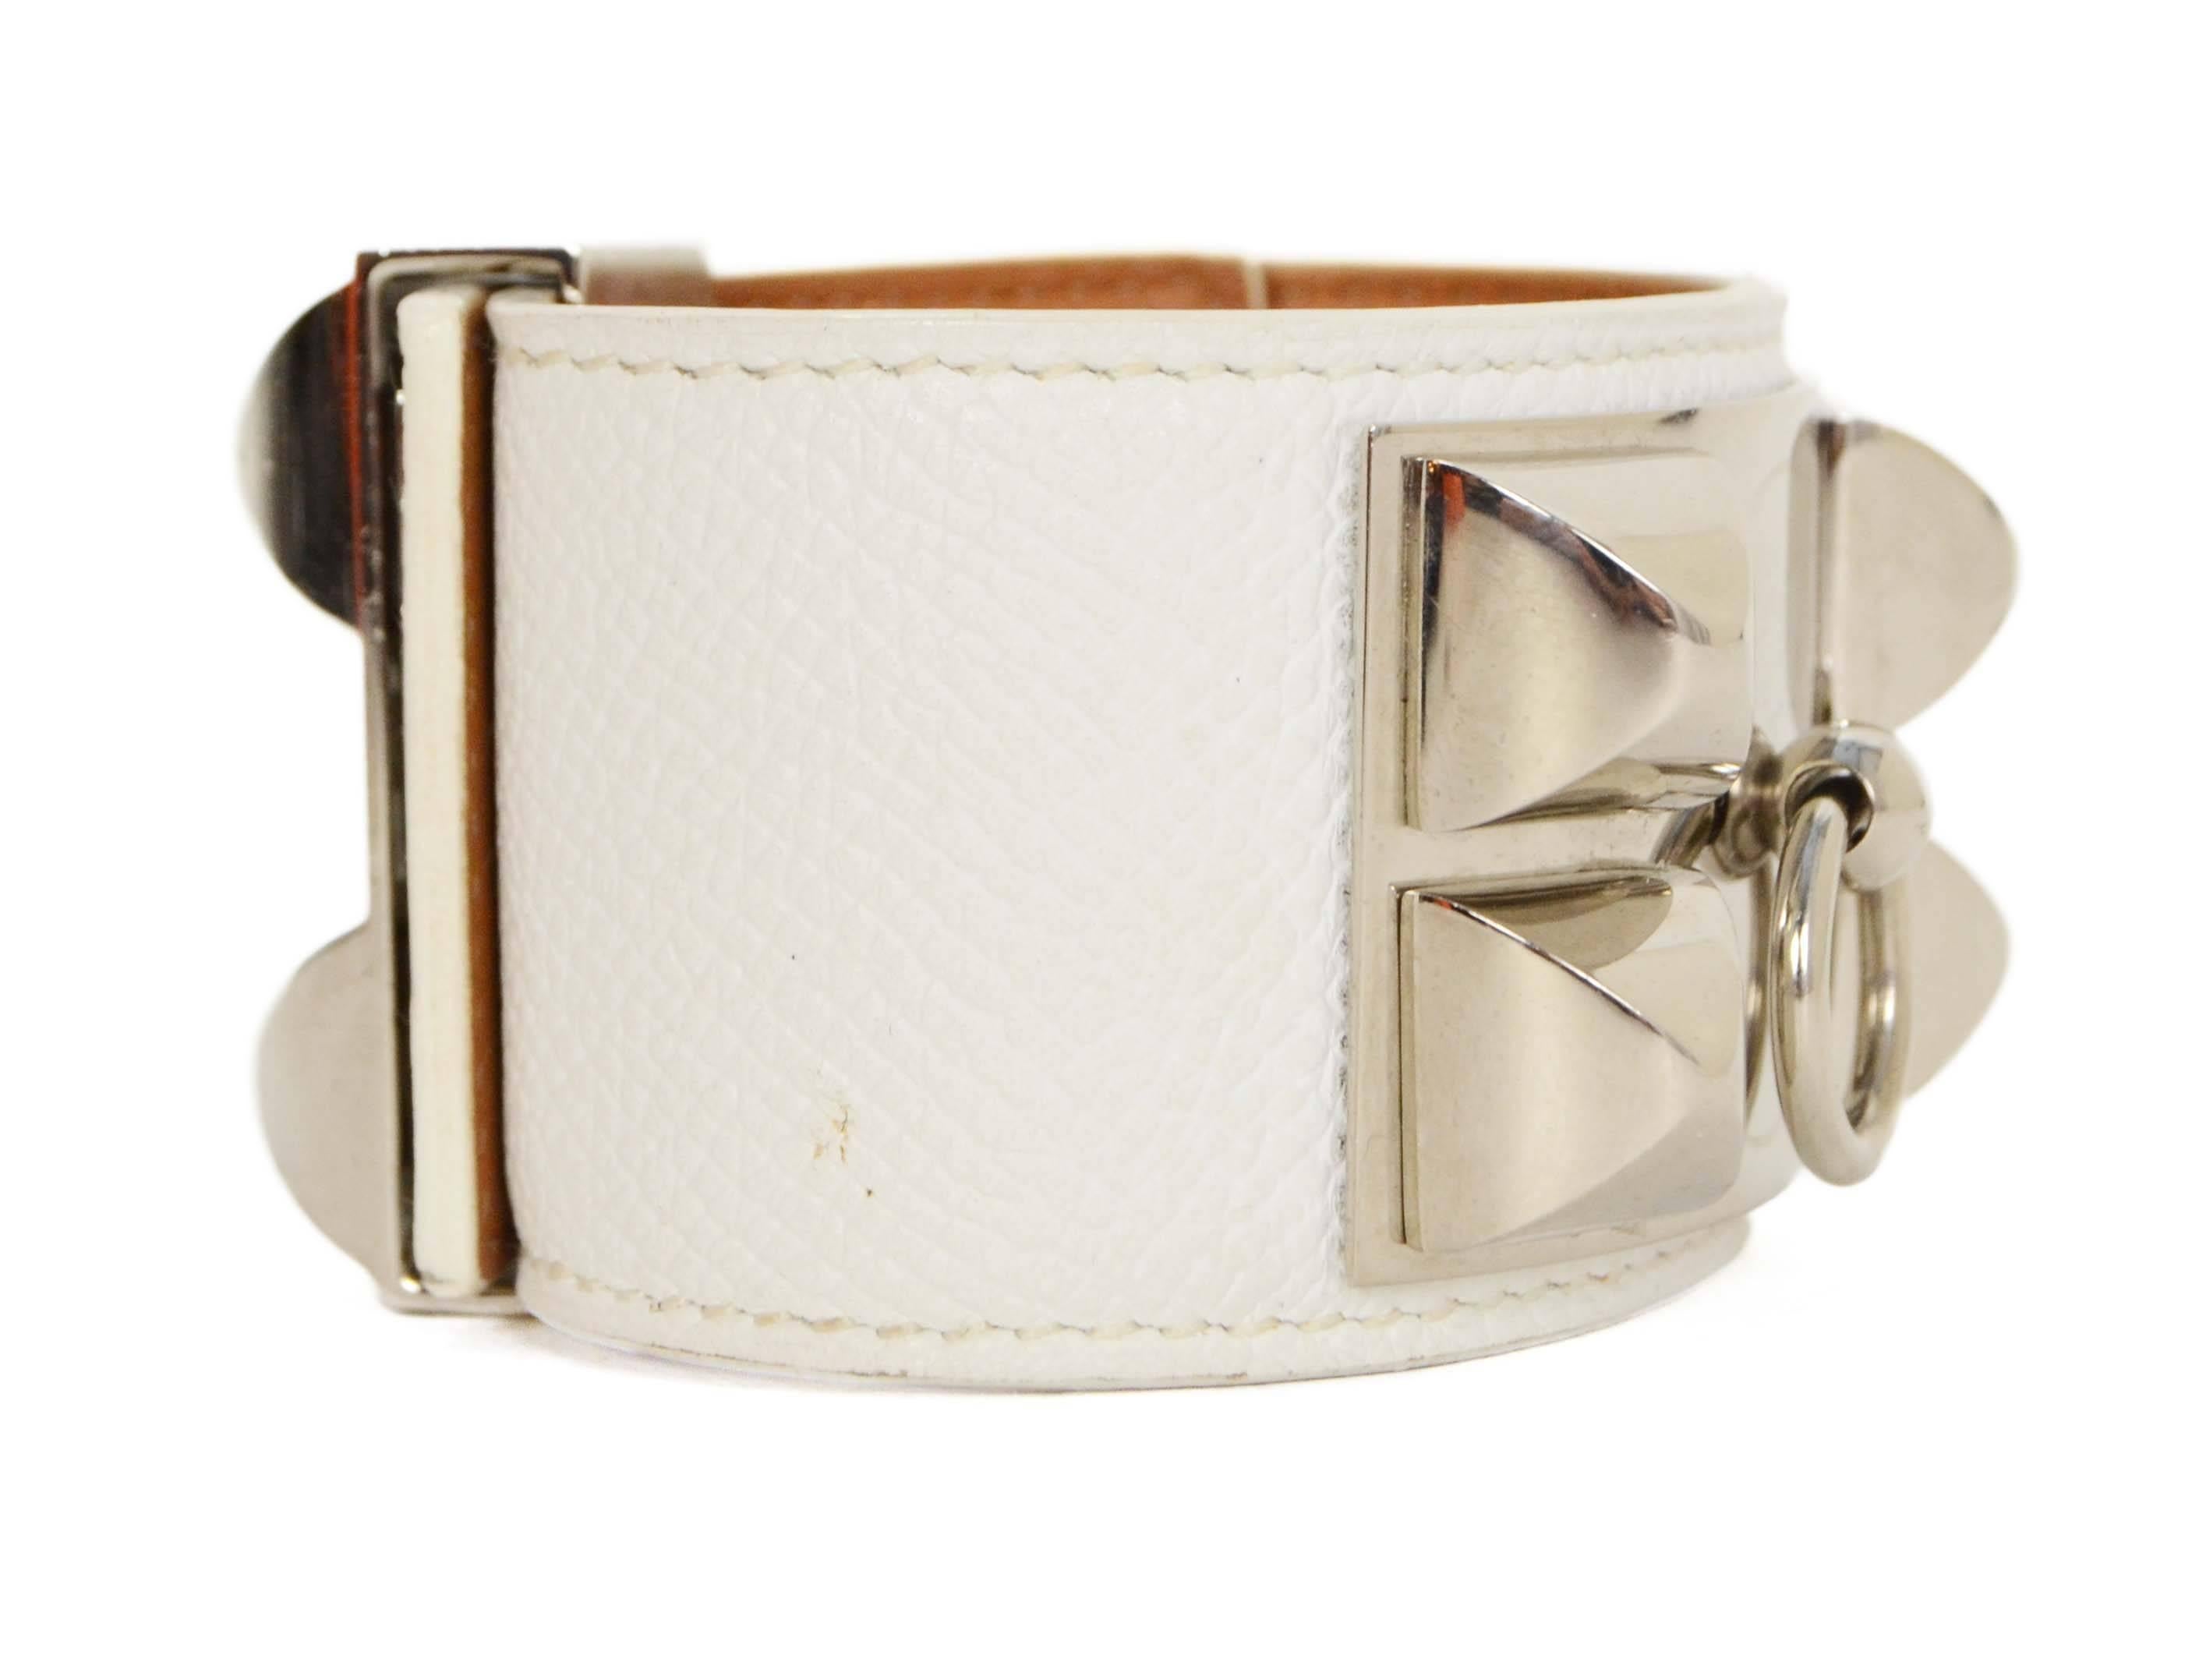 Hermes White Leather CDC Bracelet
Made in: France
Year of Production: 2011
Color: White
Hardware: Palladium
Materials: Leather and metal
Closure: Adjustable slide lock with notches
Stamp: O stamp in square
Overall Condition: Excellent with